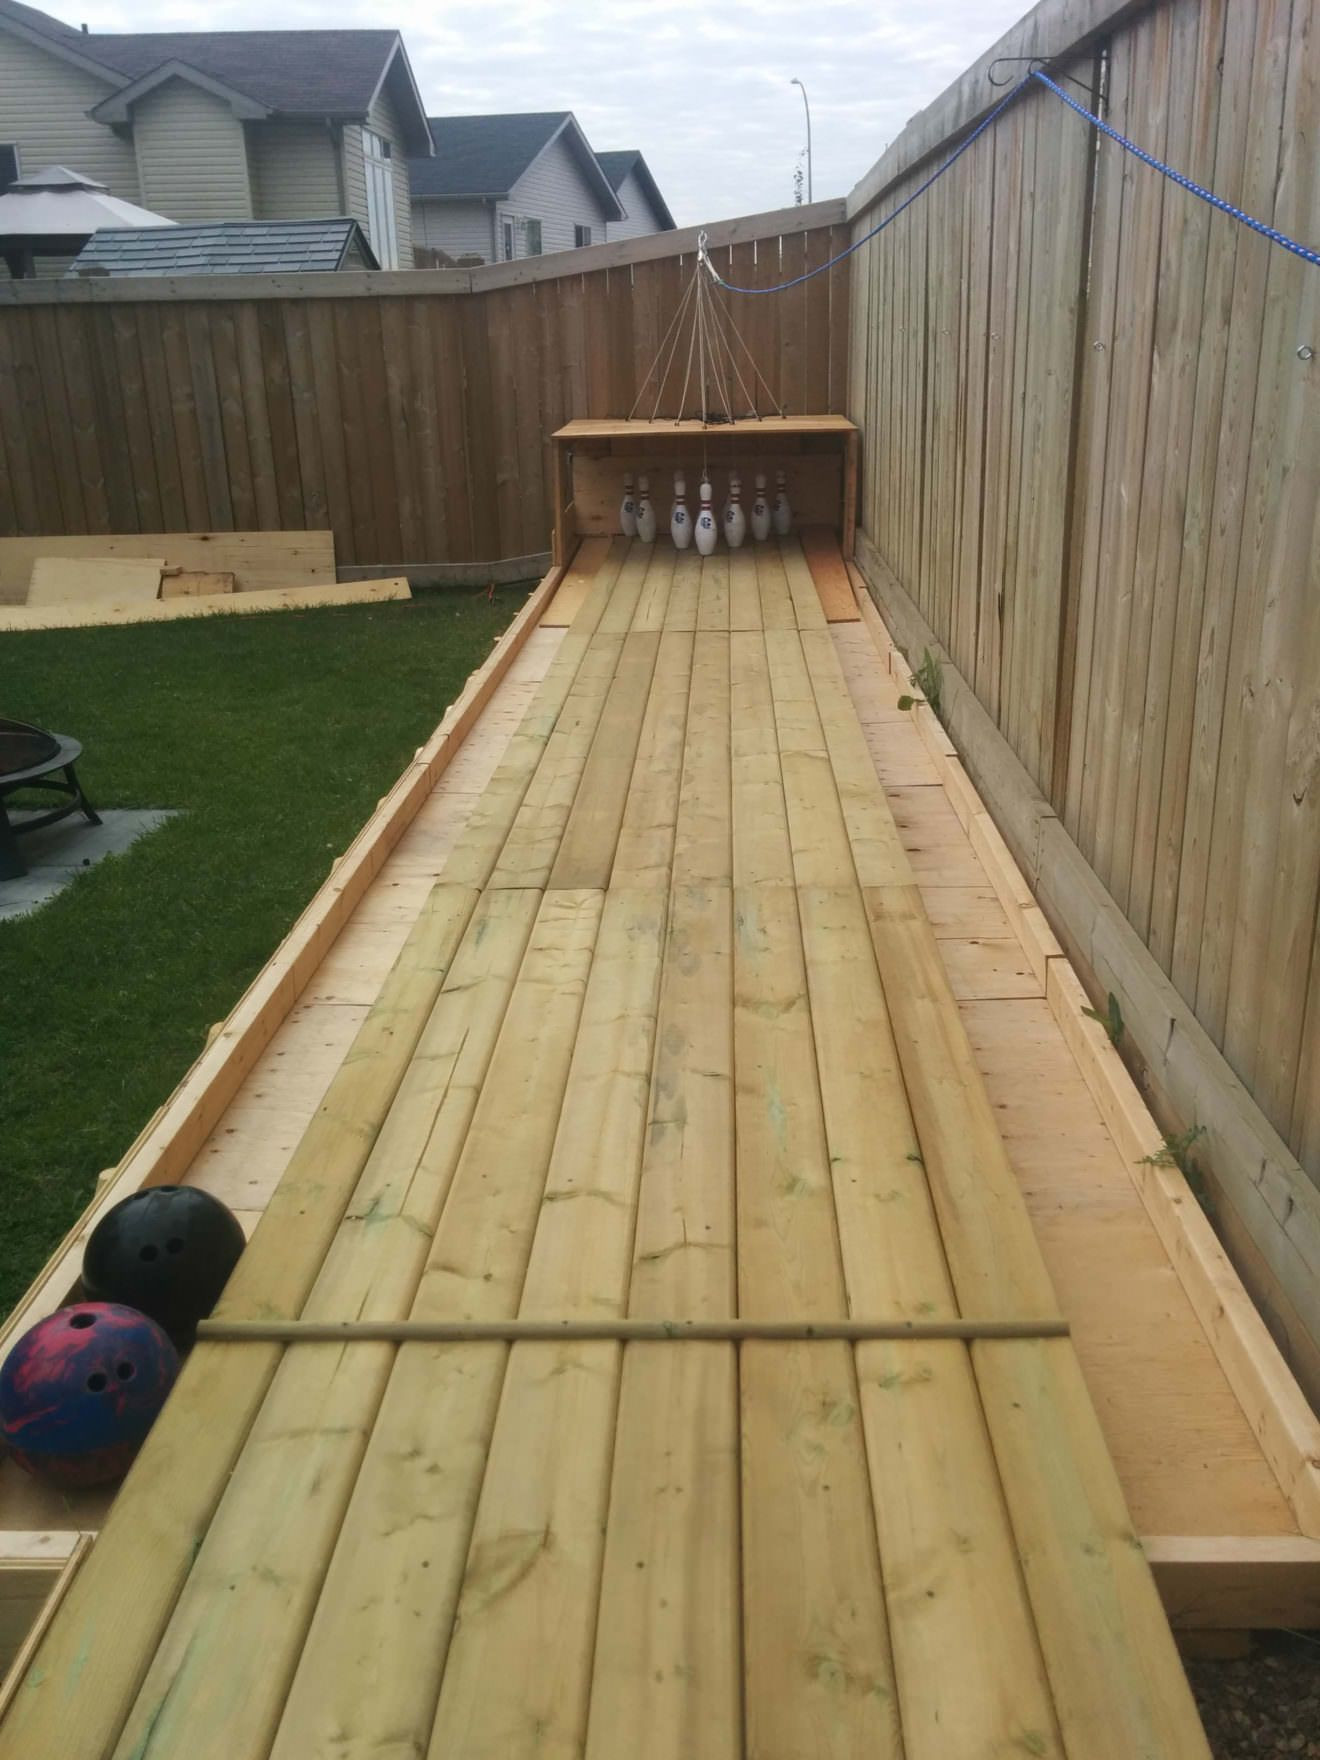 Outdoor Bowling Alley DIY
 Amazing DIY Wood Backyard Bowling Alley With images